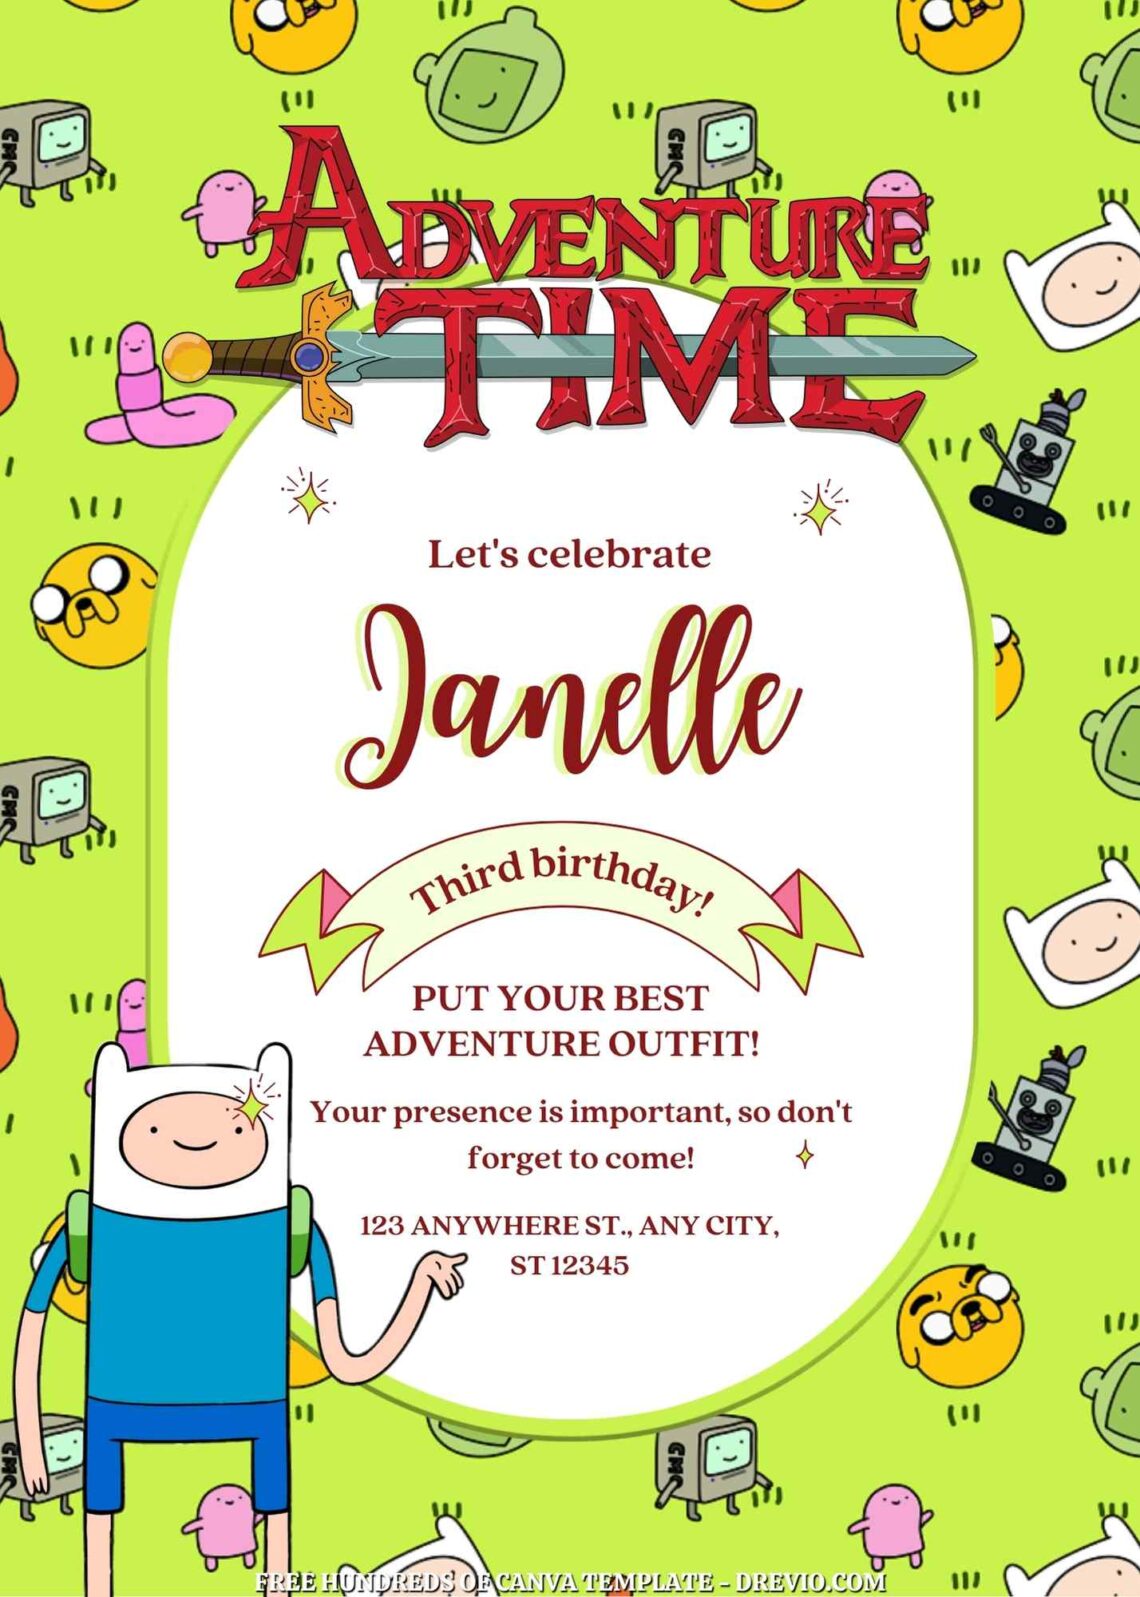 Free Adventure Time Birthday Invitations with Group in the Green Background